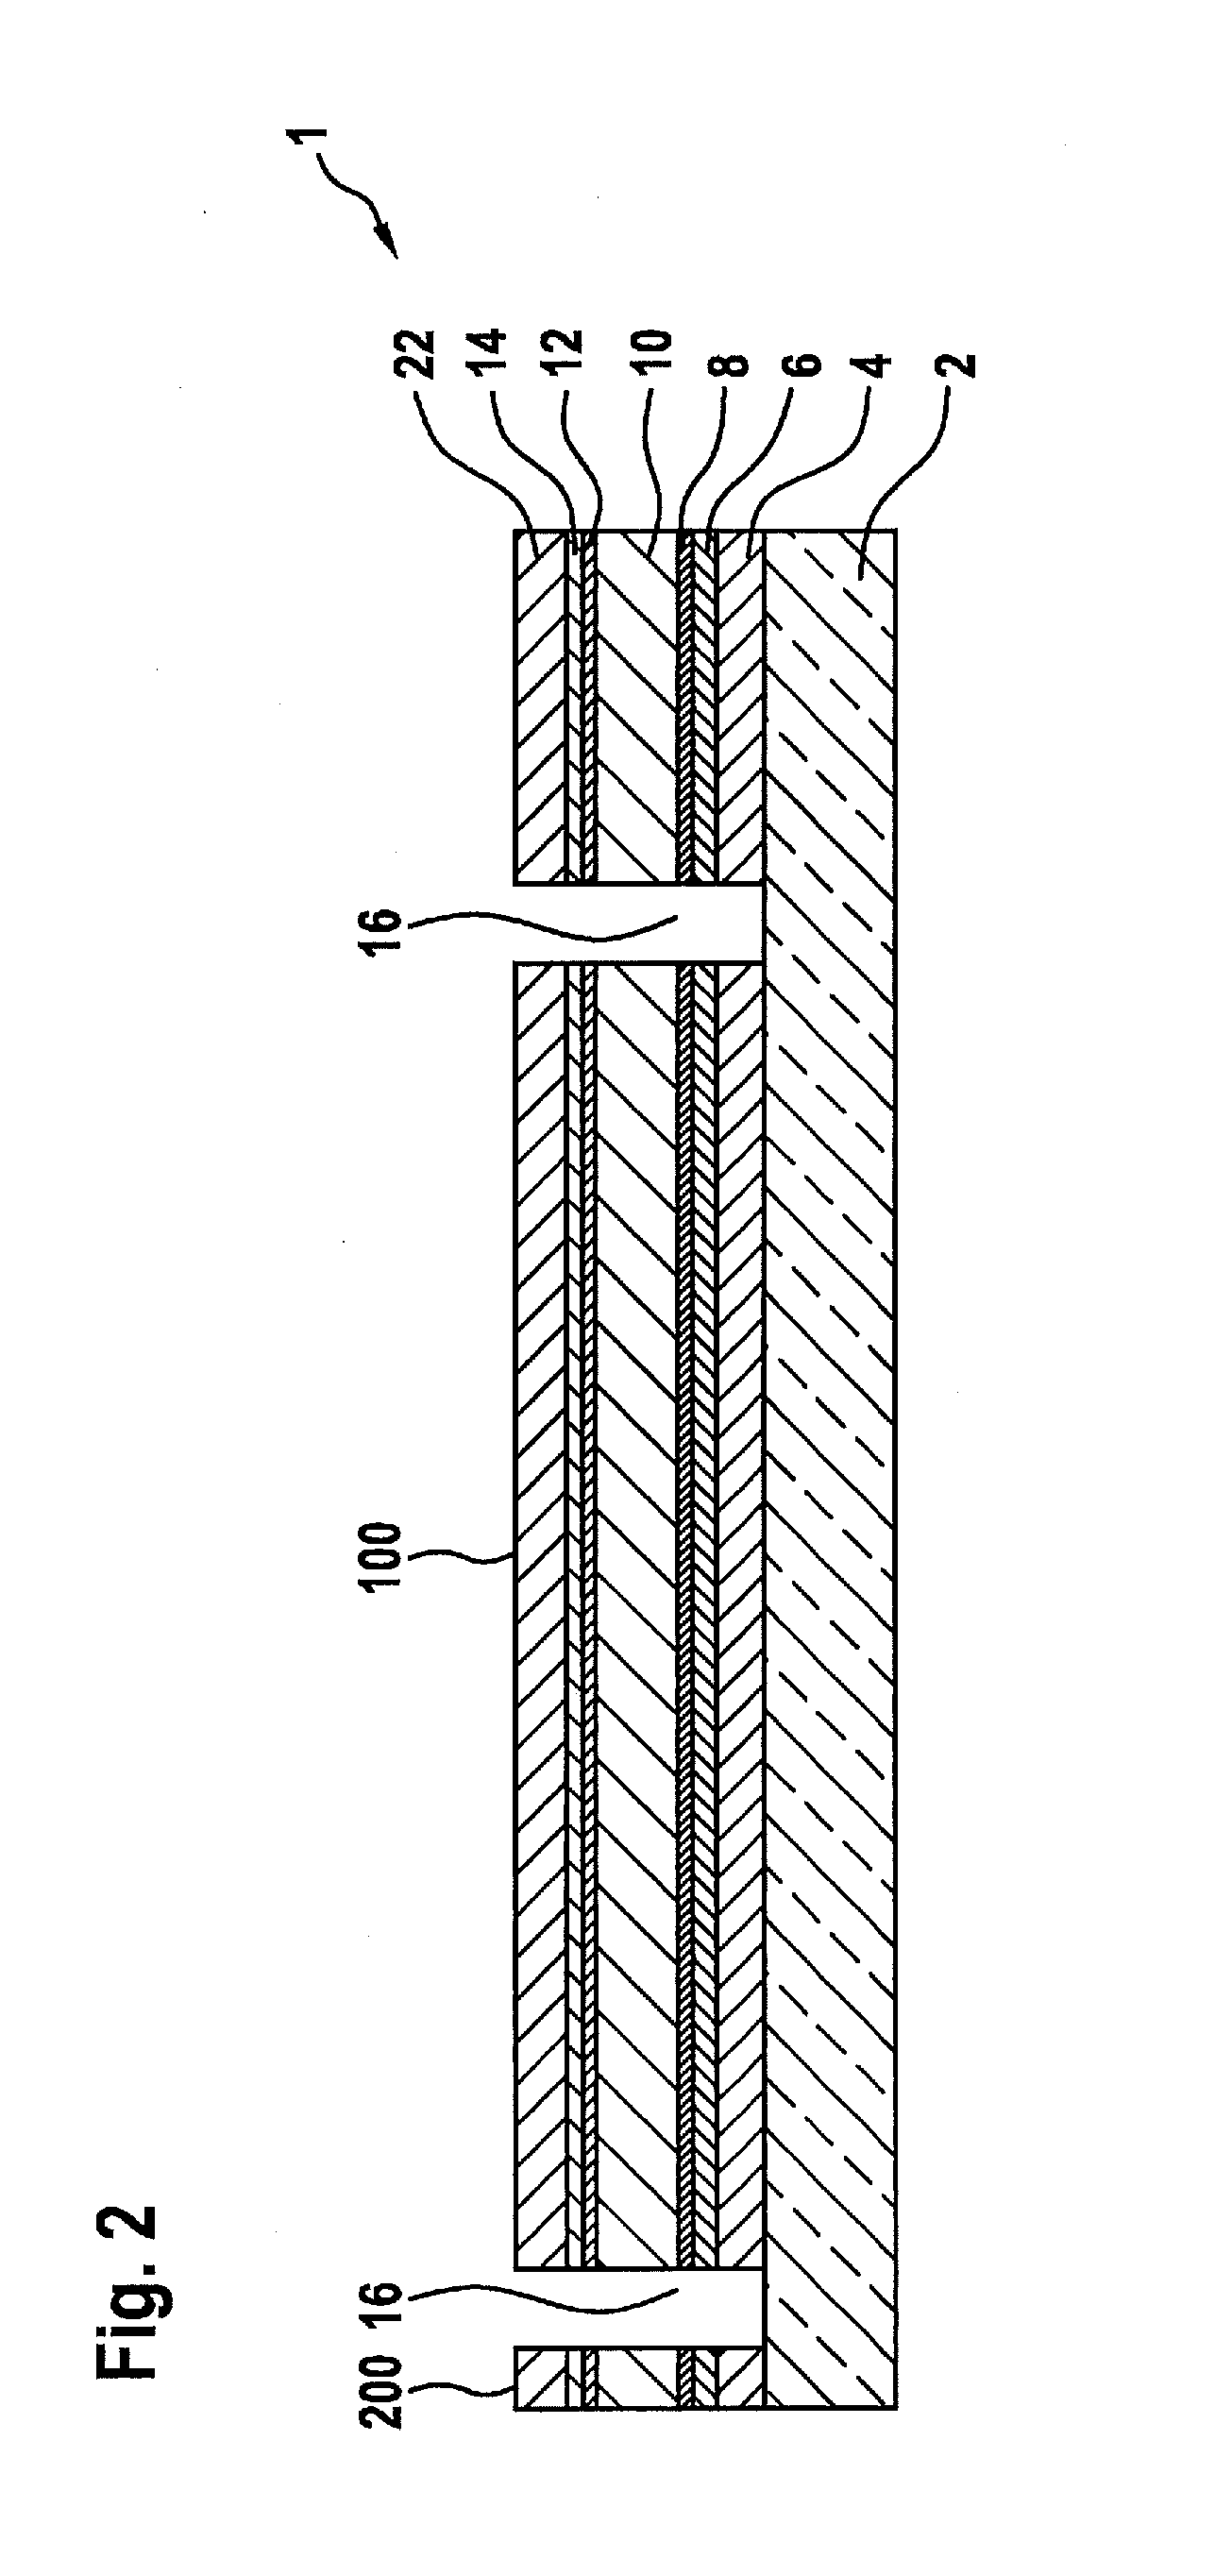 Photovoltaic thin-film solar modules and method for manufacturing such thin-film solar modules